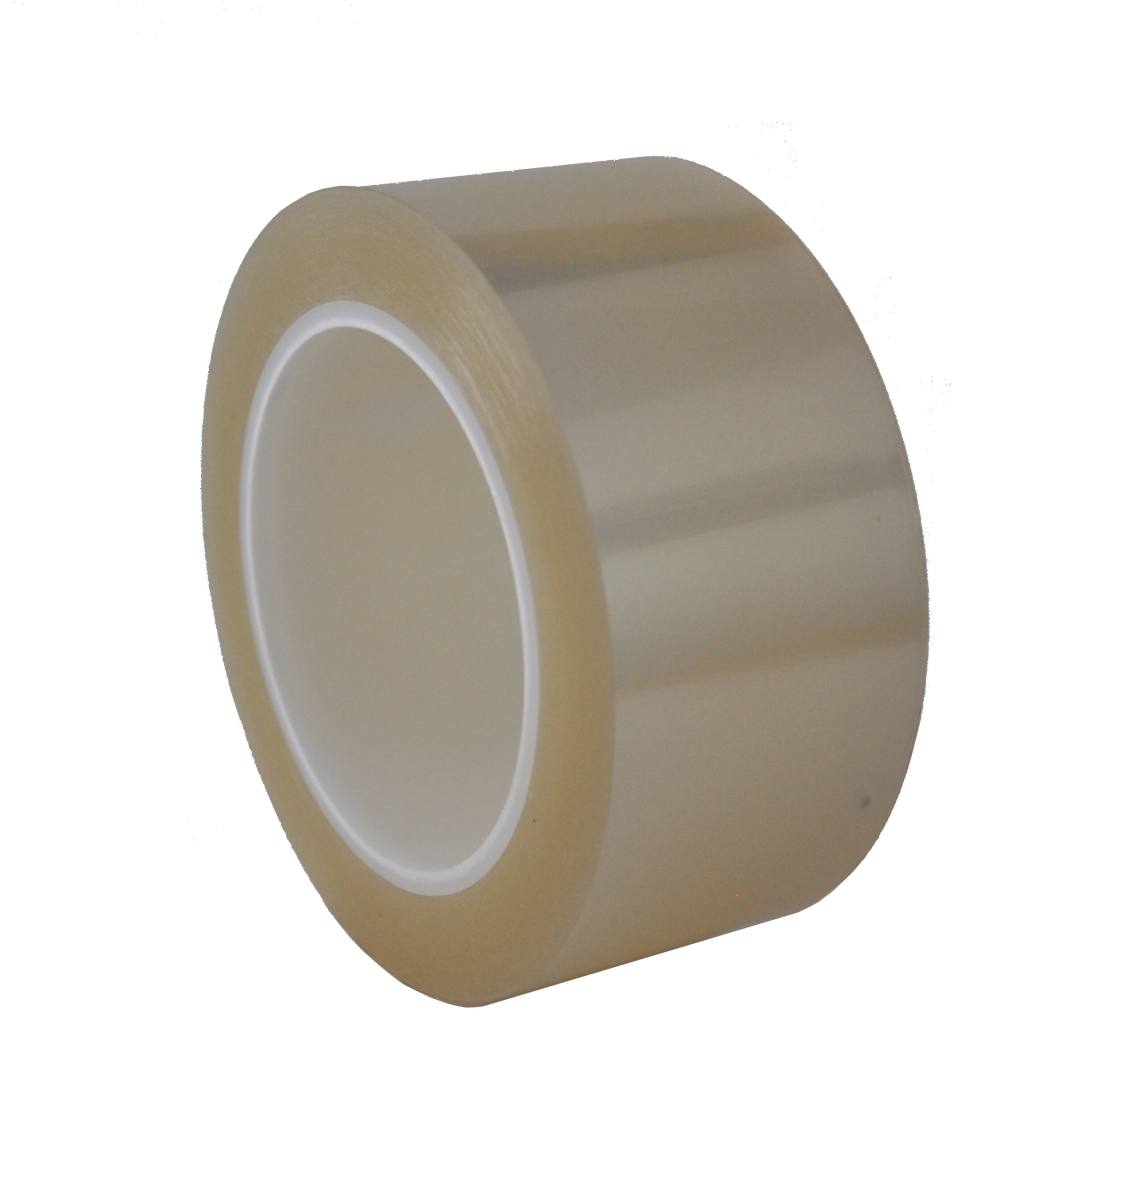 S-K-S 208T polyester adhesive tape, 9mmx66m, transparent